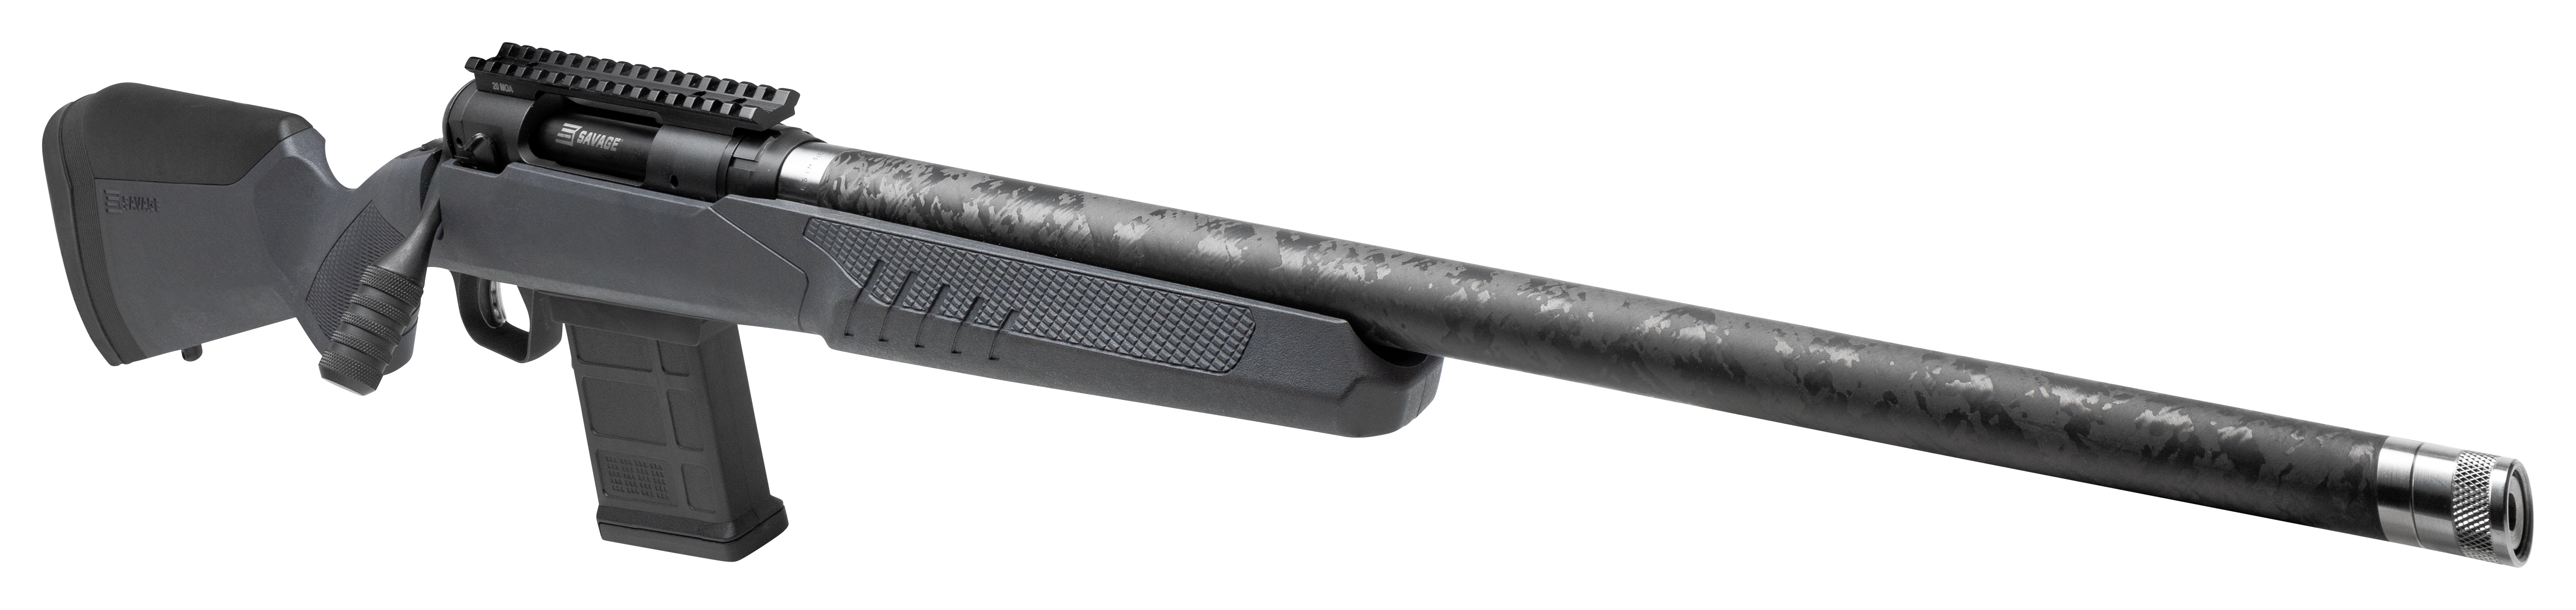 Savage Arms Introduces the new 110 Carbon Tactical Bolt-Action Rifle